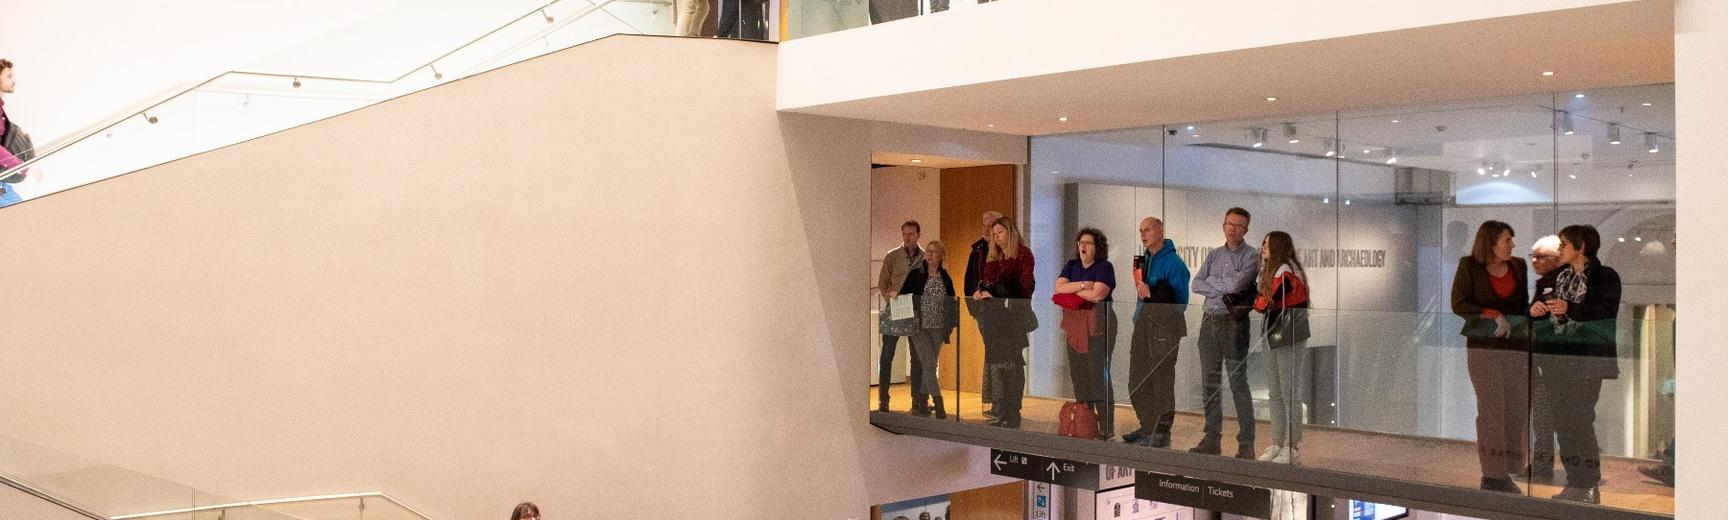 People standing on a balcony at the Ashmoleum Museum viewing an exhibition that is out of frame